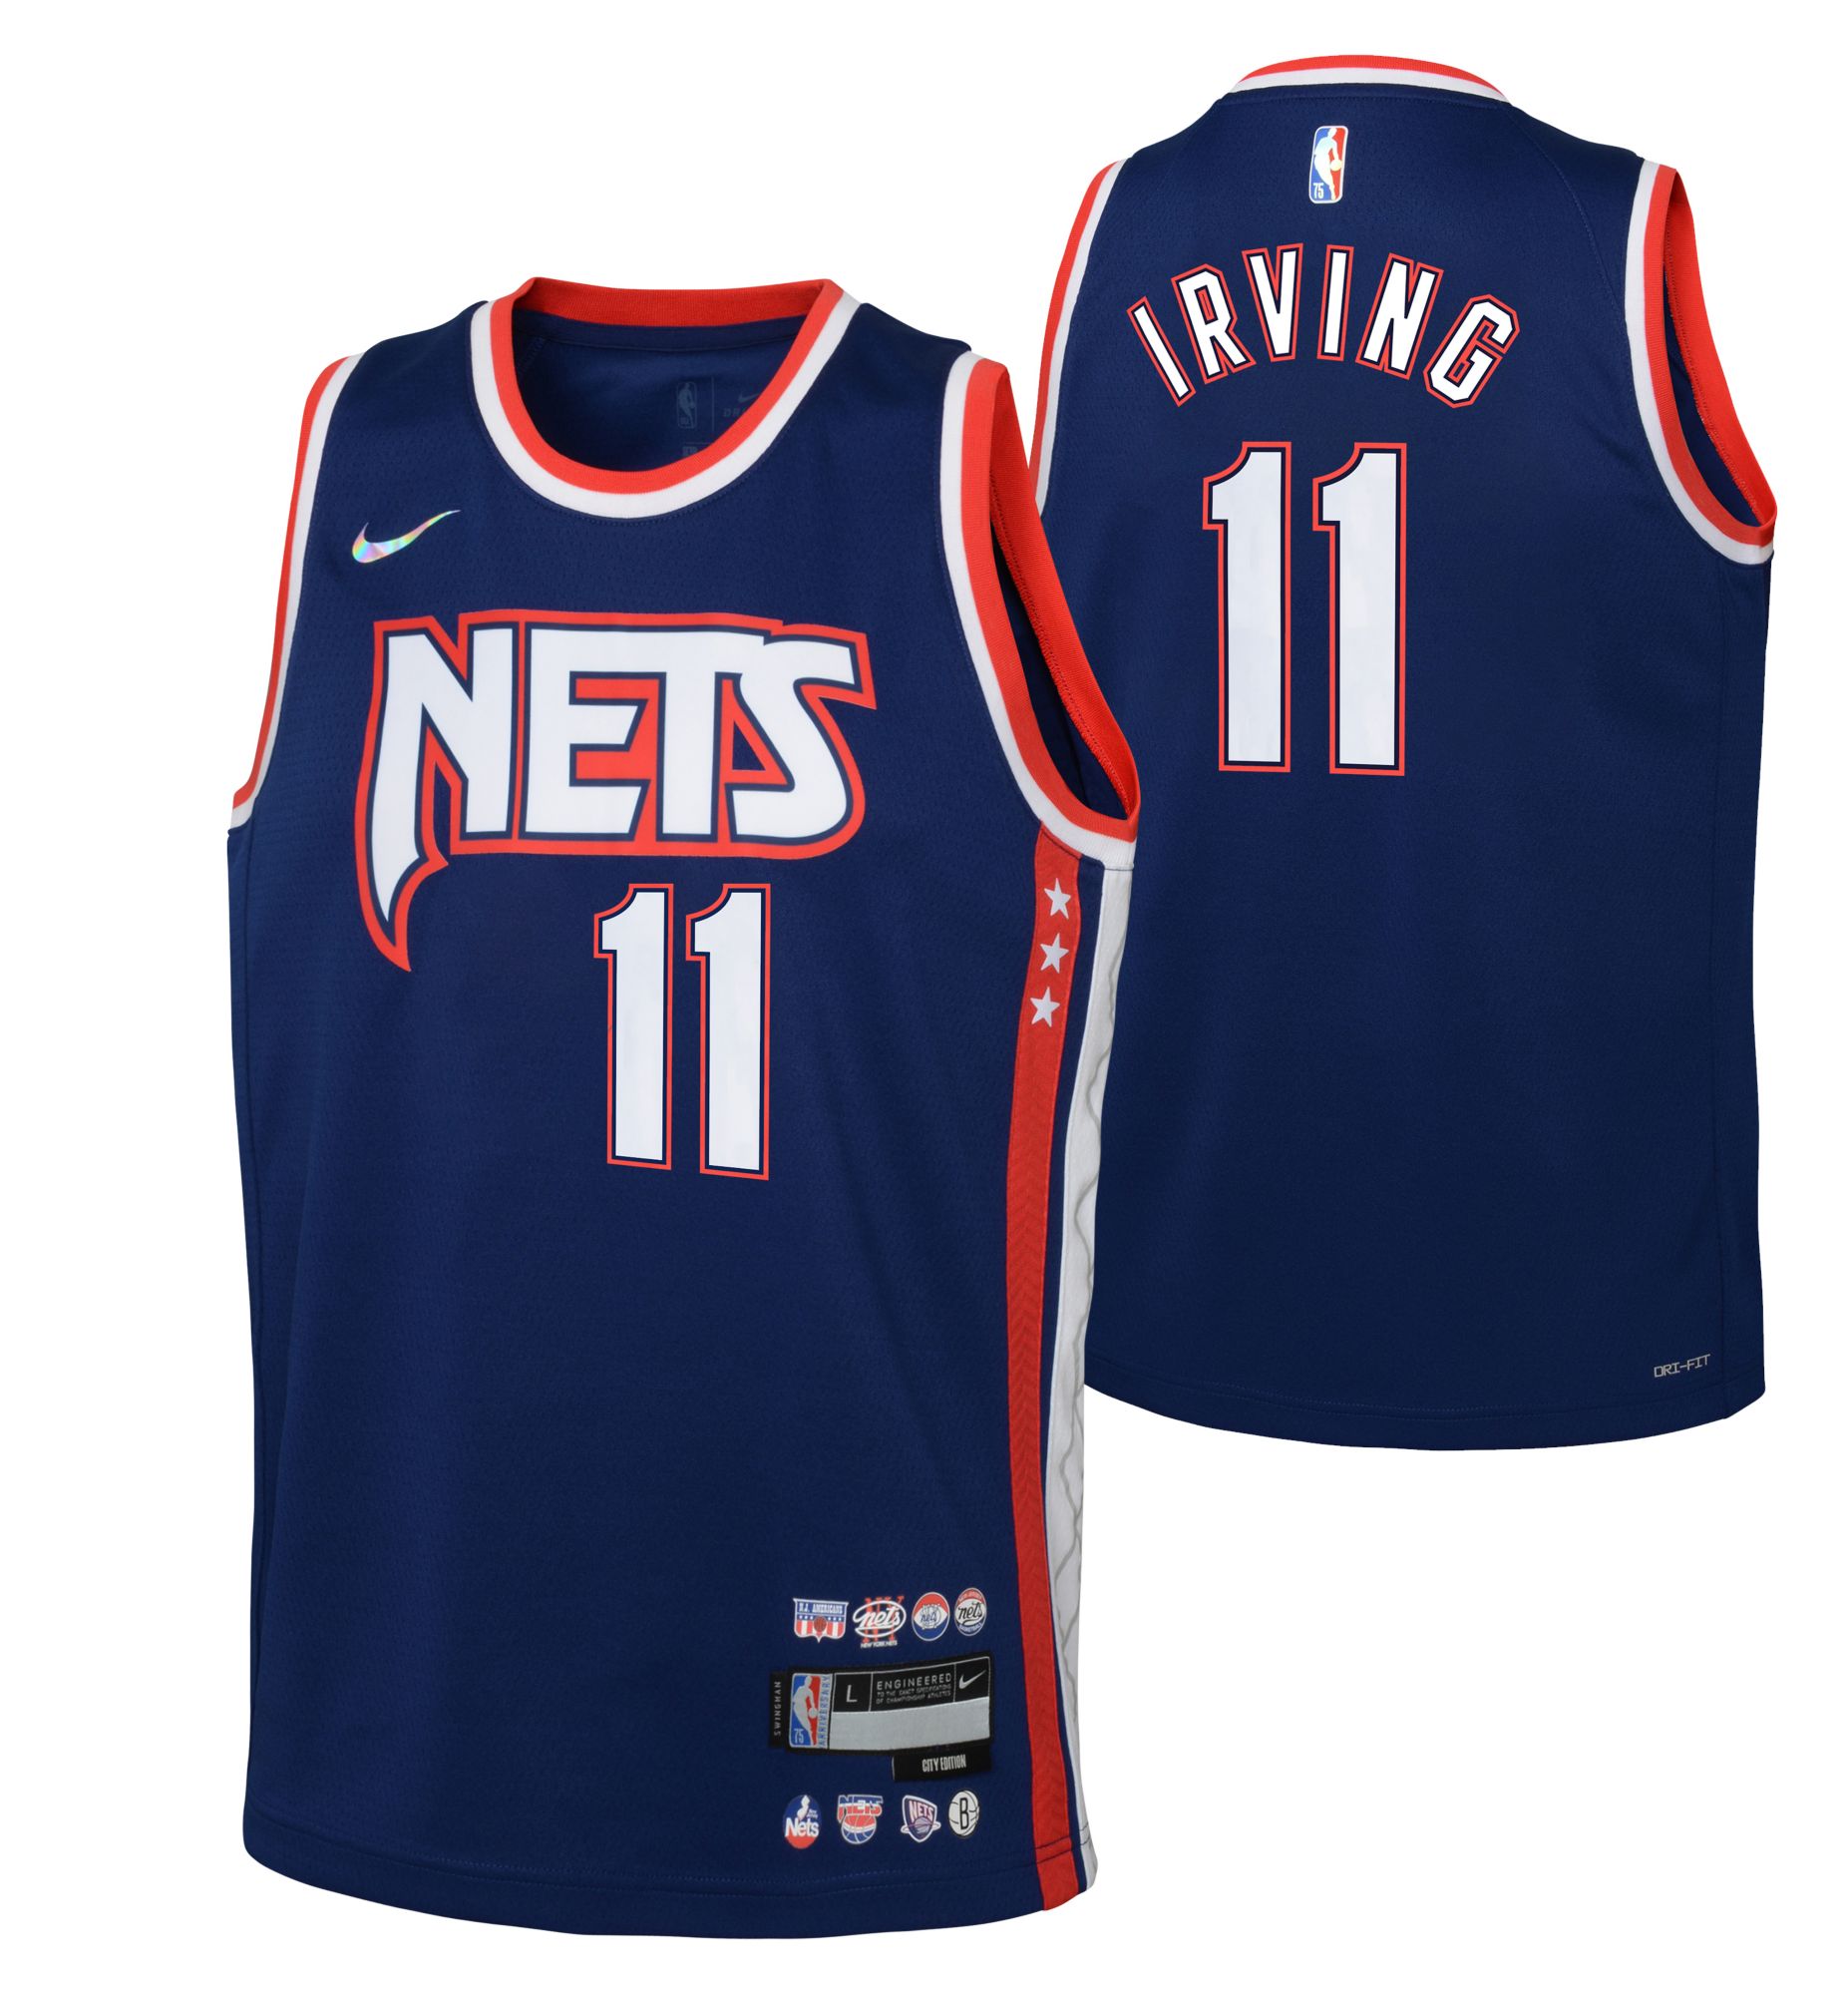 Nike / Youth 2021-22 City Edition Brooklyn Nets Kyrie Blue Jersey